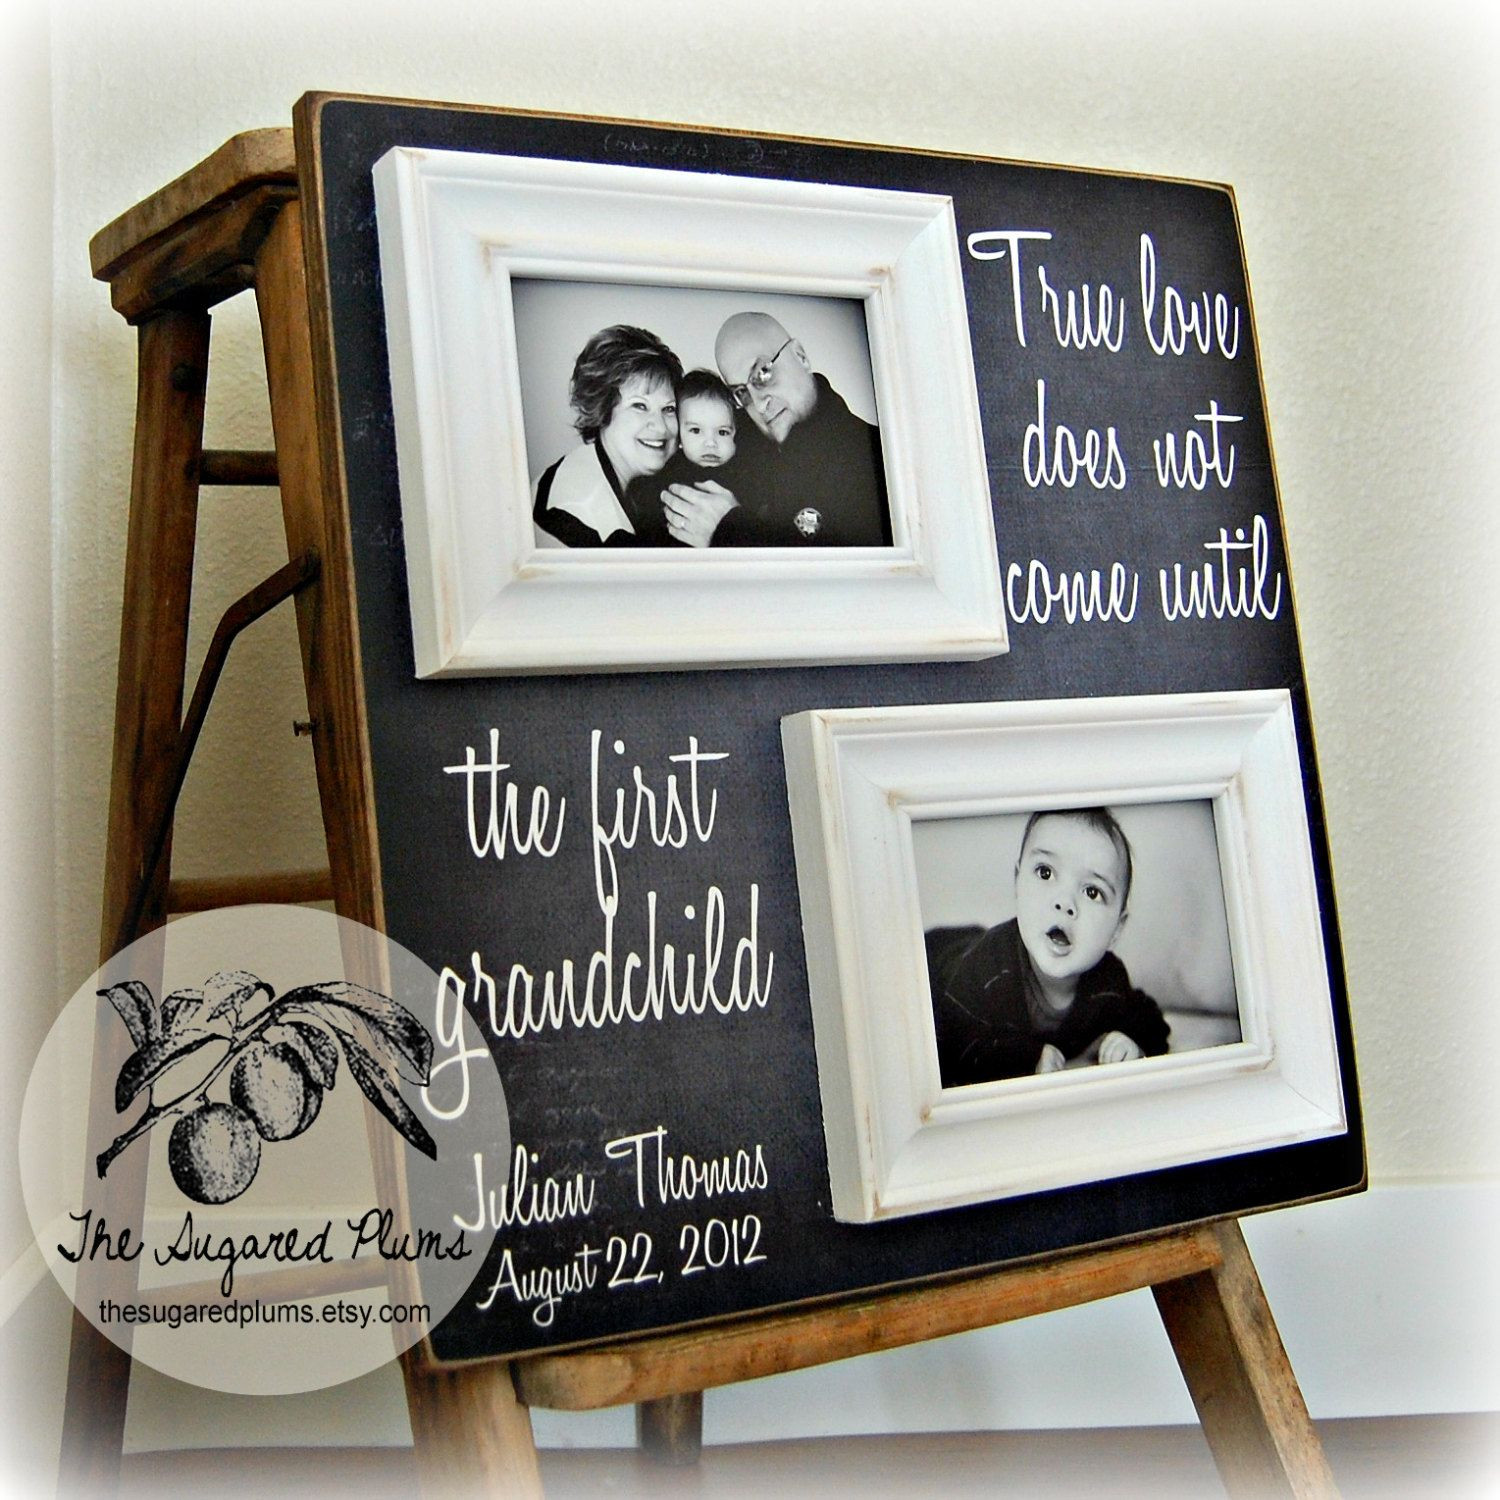 Gift Ideas For New Grandbaby
 Gifts For Grandparents Personalized Picture Frame Custom